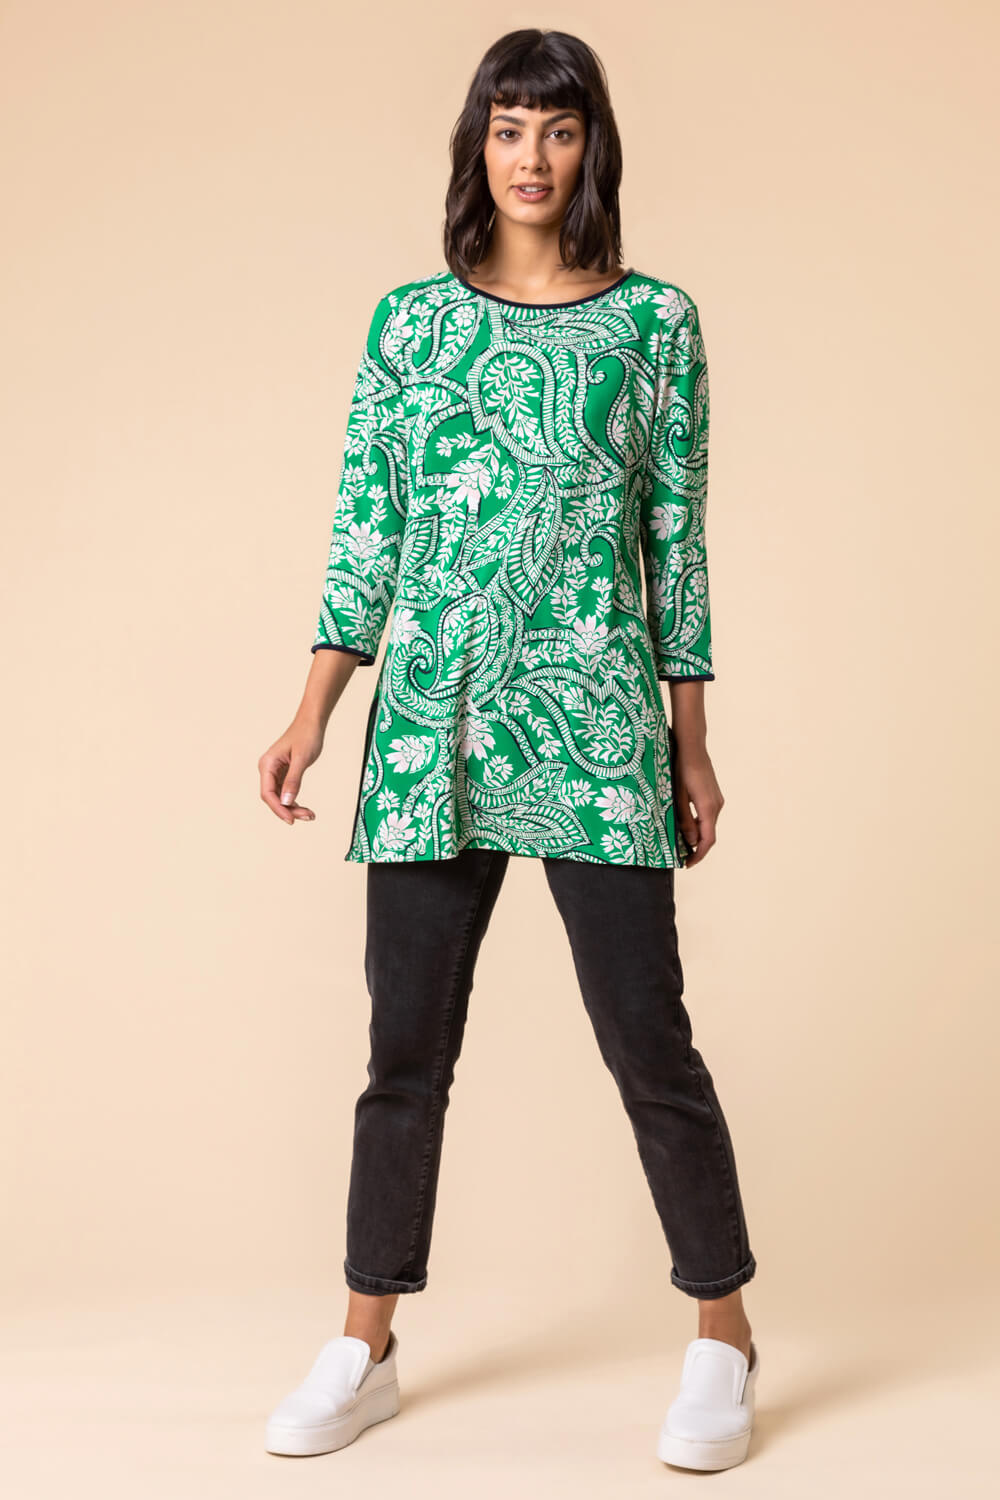 Green Paisley Print Contrast Trim Tunic Top, Image 3 of 4